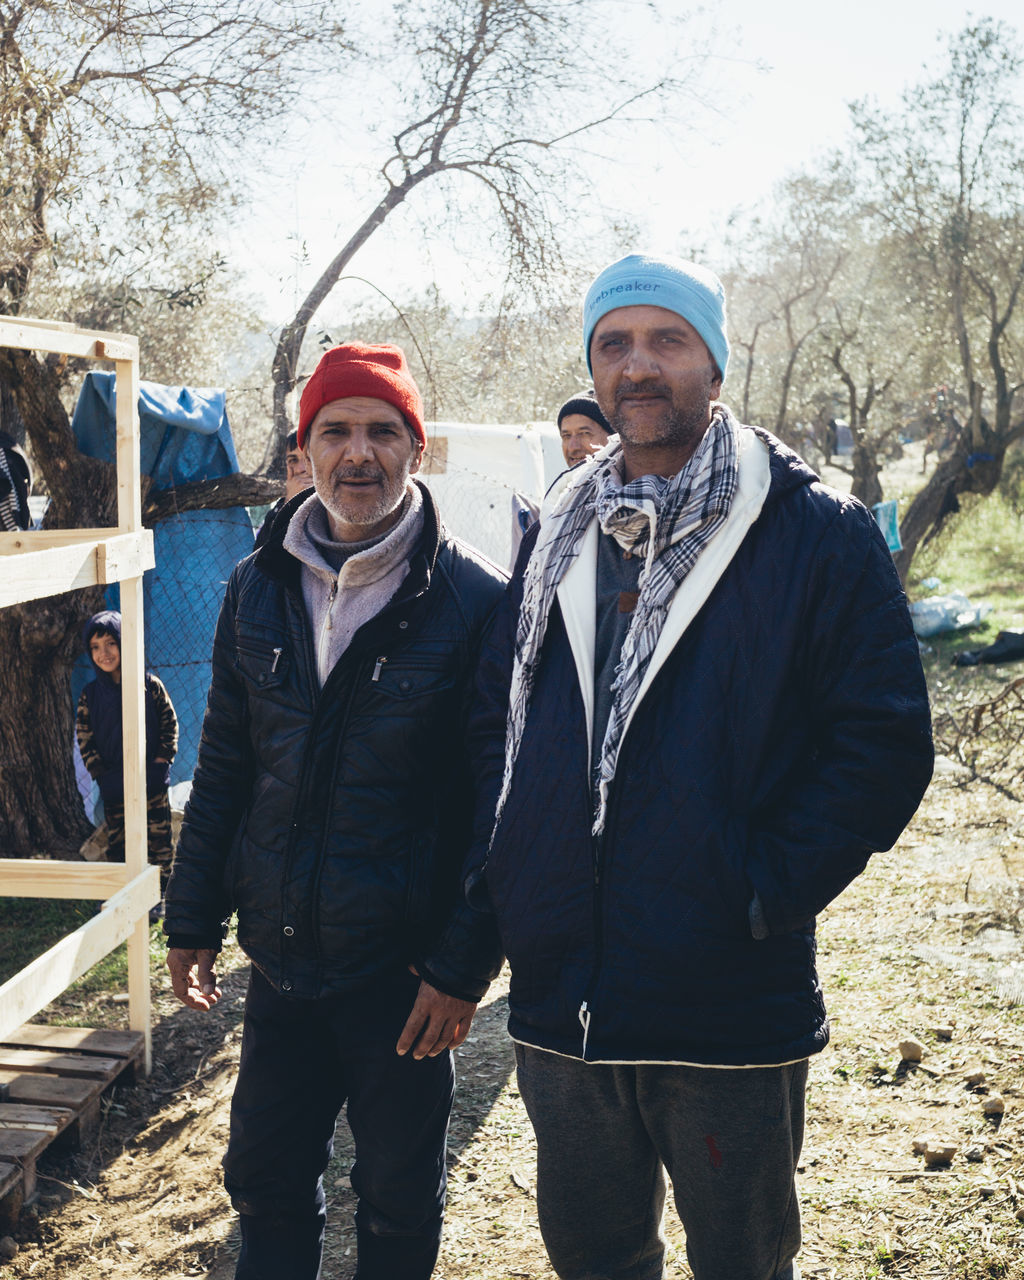 men, two people, adult, clothing, winter, looking at camera, nature, warm clothing, standing, togetherness, day, portrait, person, tree, front view, smiling, cold temperature, emotion, hat, lifestyles, leisure activity, outdoors, mature adult, happiness, knit hat, three quarter length, jacket, friendship, sky, occupation, young adult